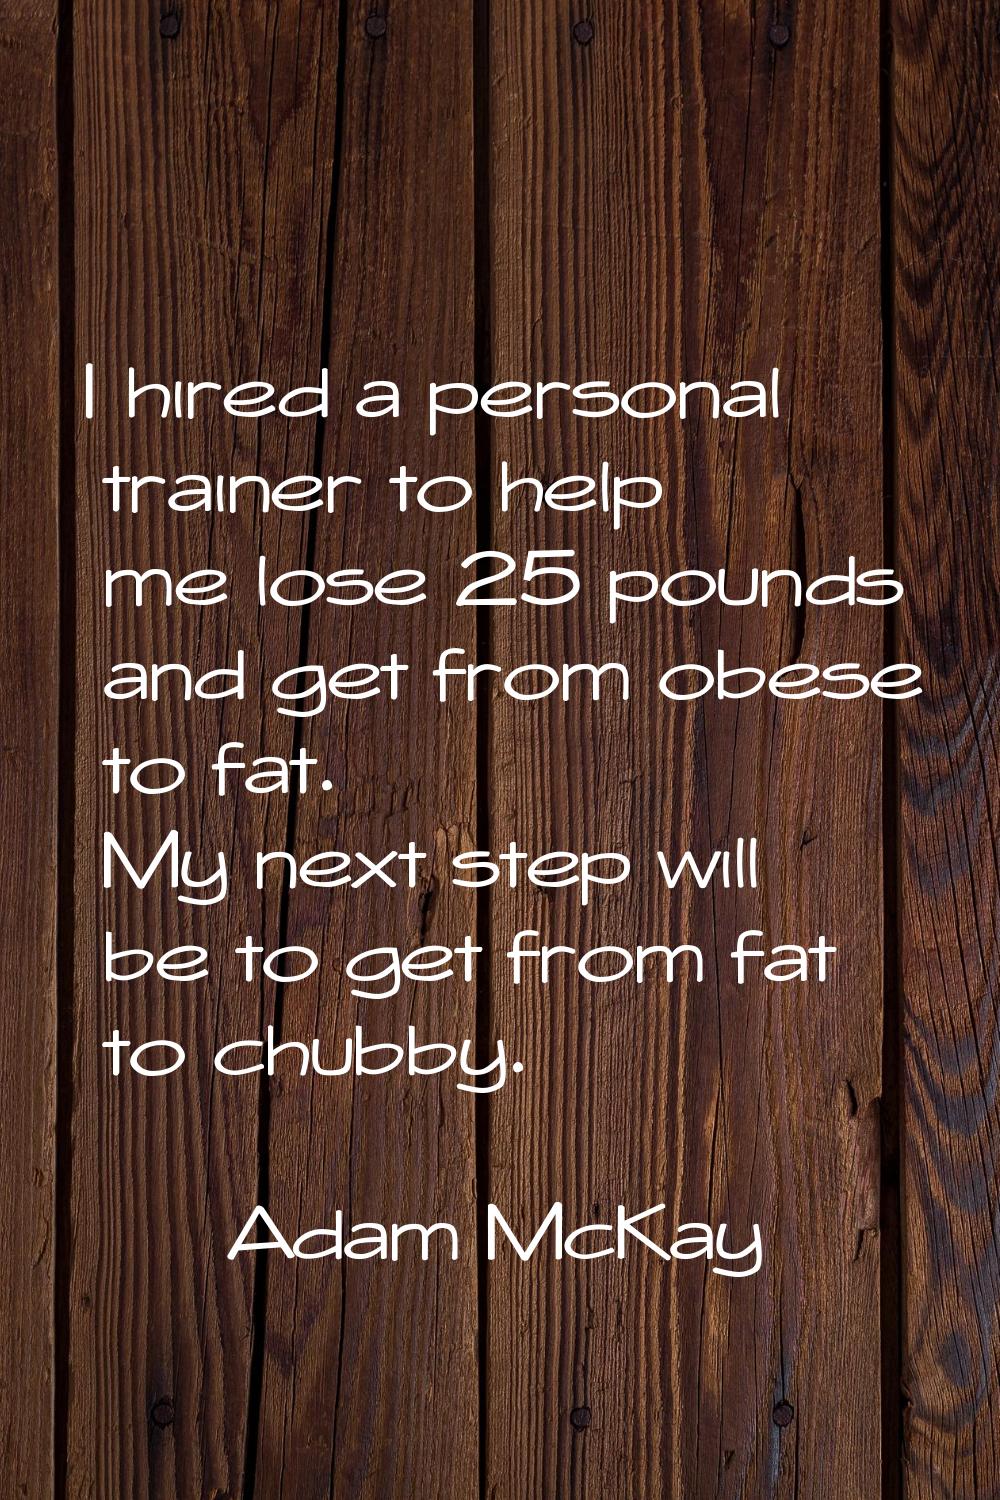 I hired a personal trainer to help me lose 25 pounds and get from obese to fat. My next step will b